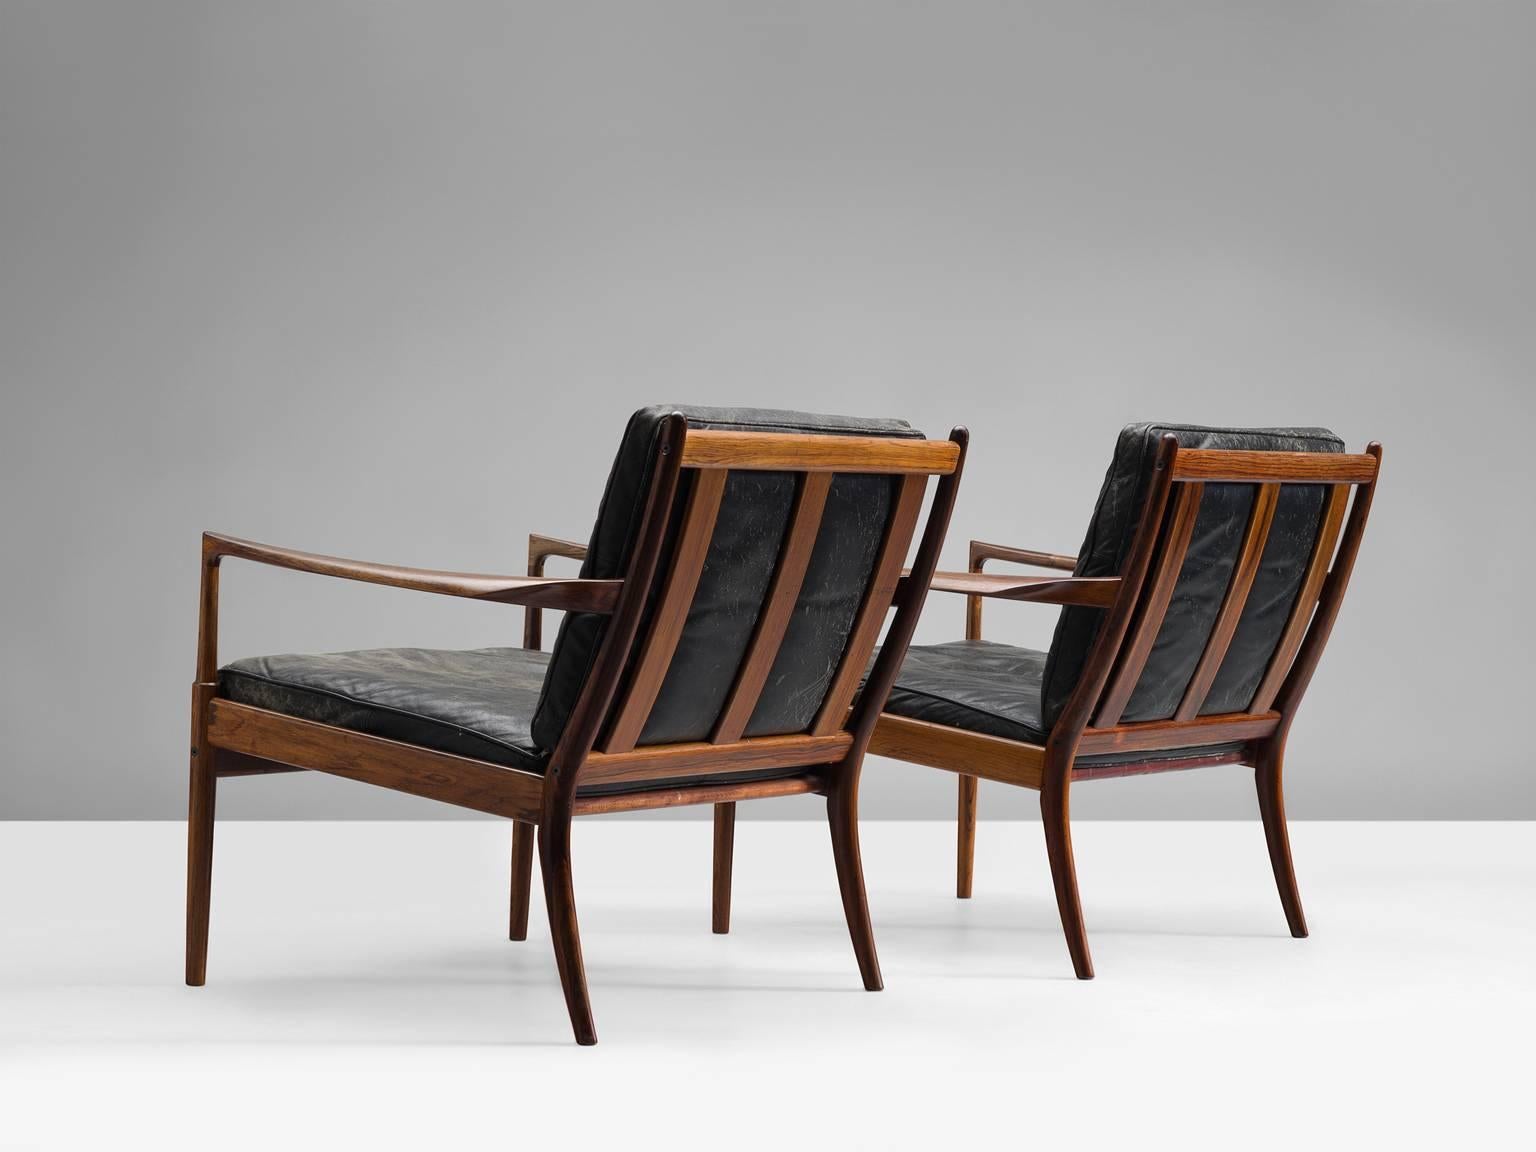 Ib Kofod-Larsen rosewood 'Samsö' easy chair, circa 1960–1969.

These gorgeous black leather and rosewood Danish modern lounge chairs were designed by Ib Kofod-Larsen (1921-2003). They feature rosewood frames and amazingly black leather. Danish